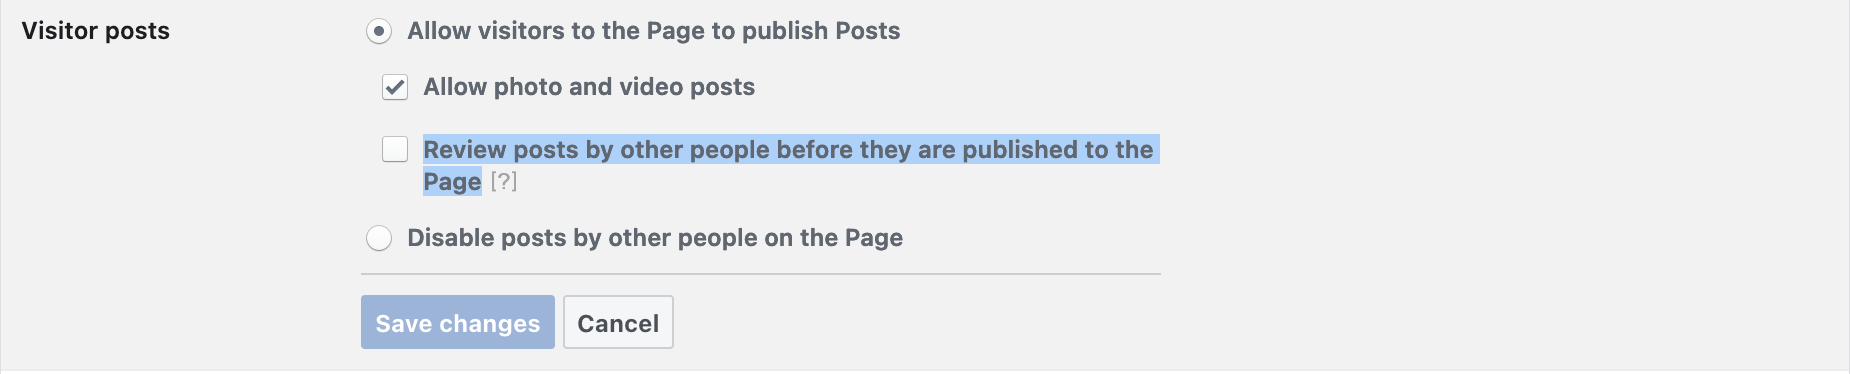 Changing visitor post options in Facebook